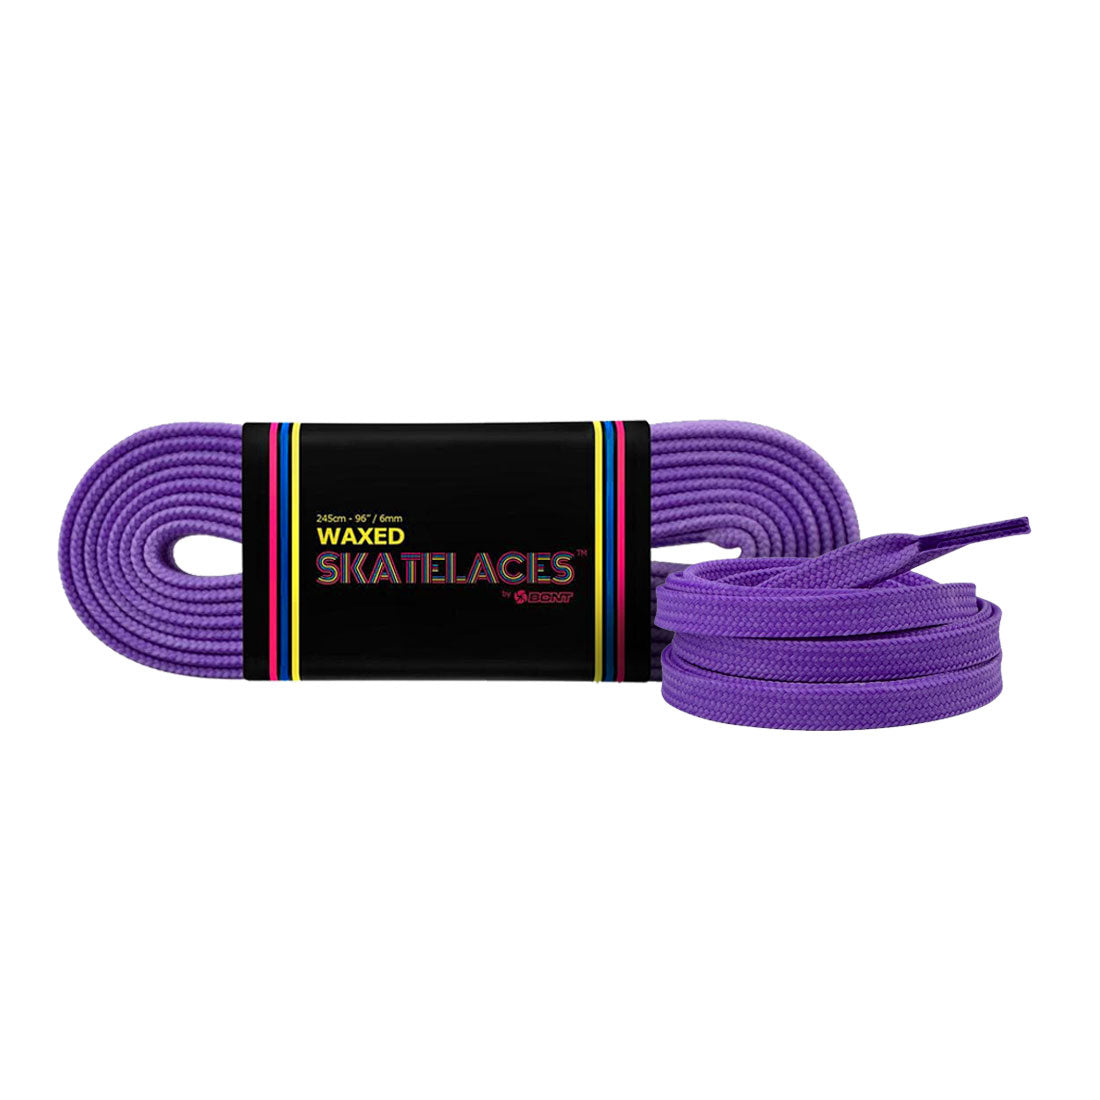 Bont Waxed 8mm Laces - 150cm/59in Dare You Purple Laces